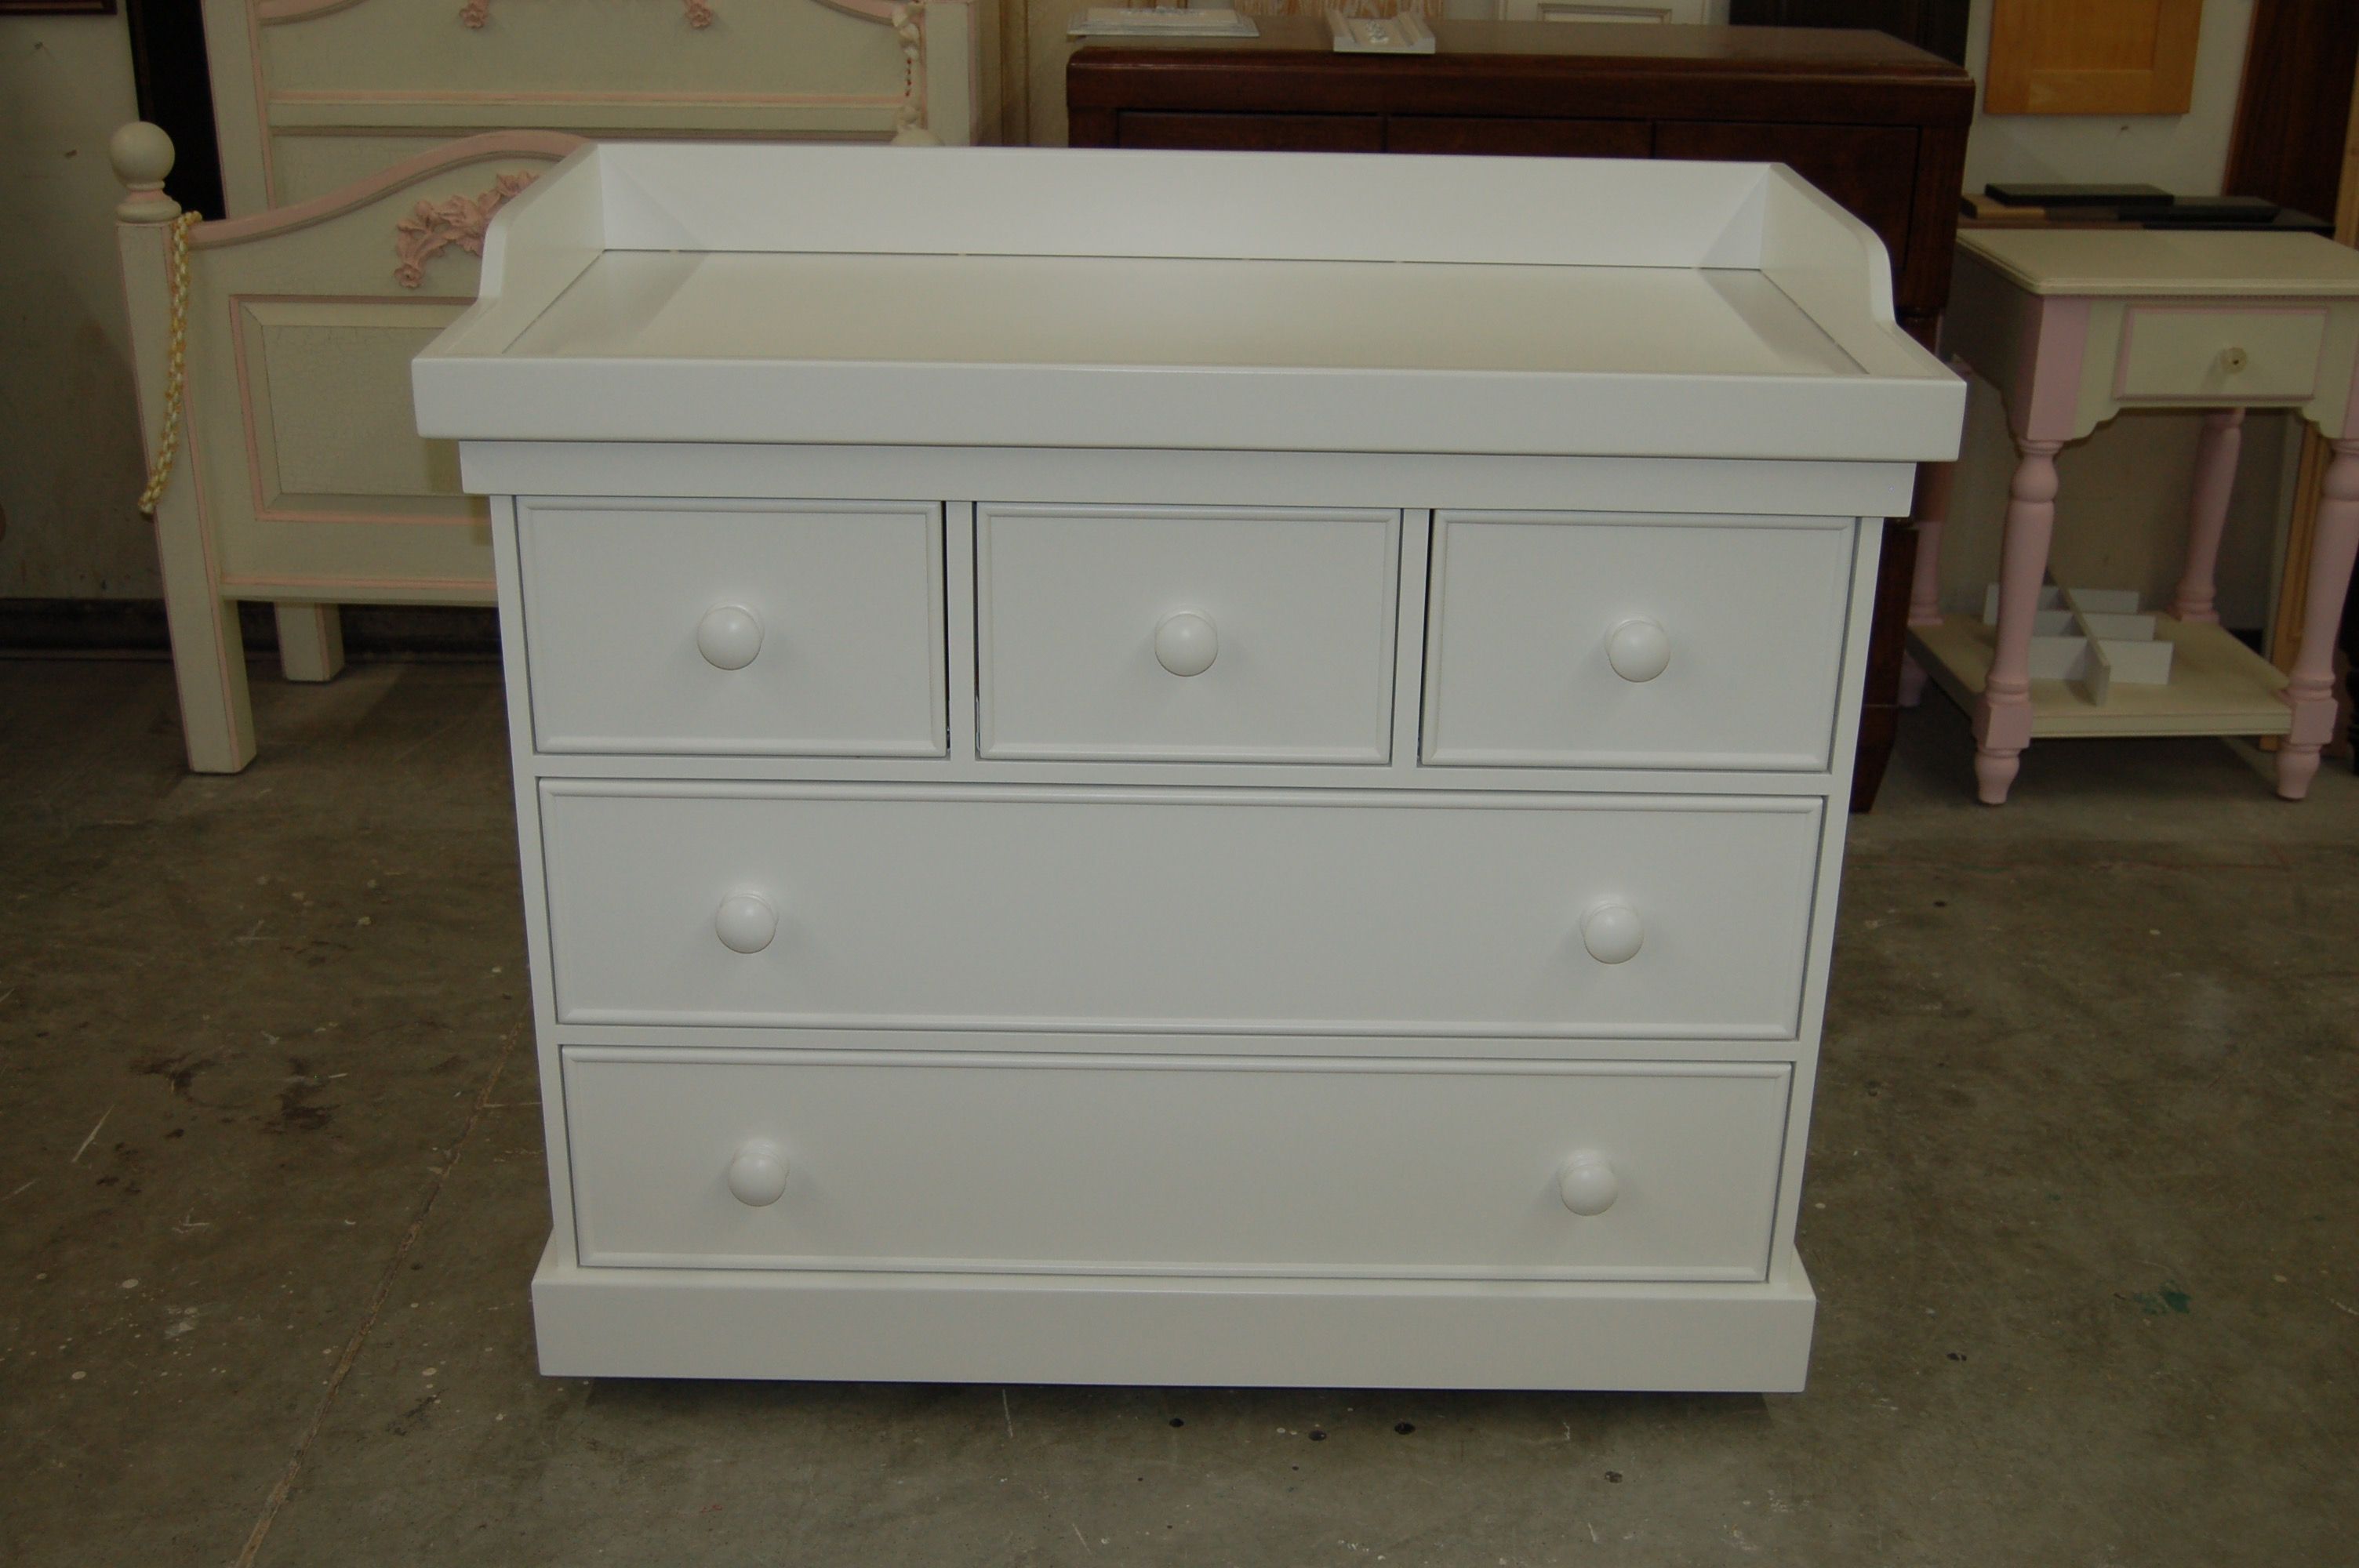 Buy A Custom Classic Dresser Changing Table Made To Order From